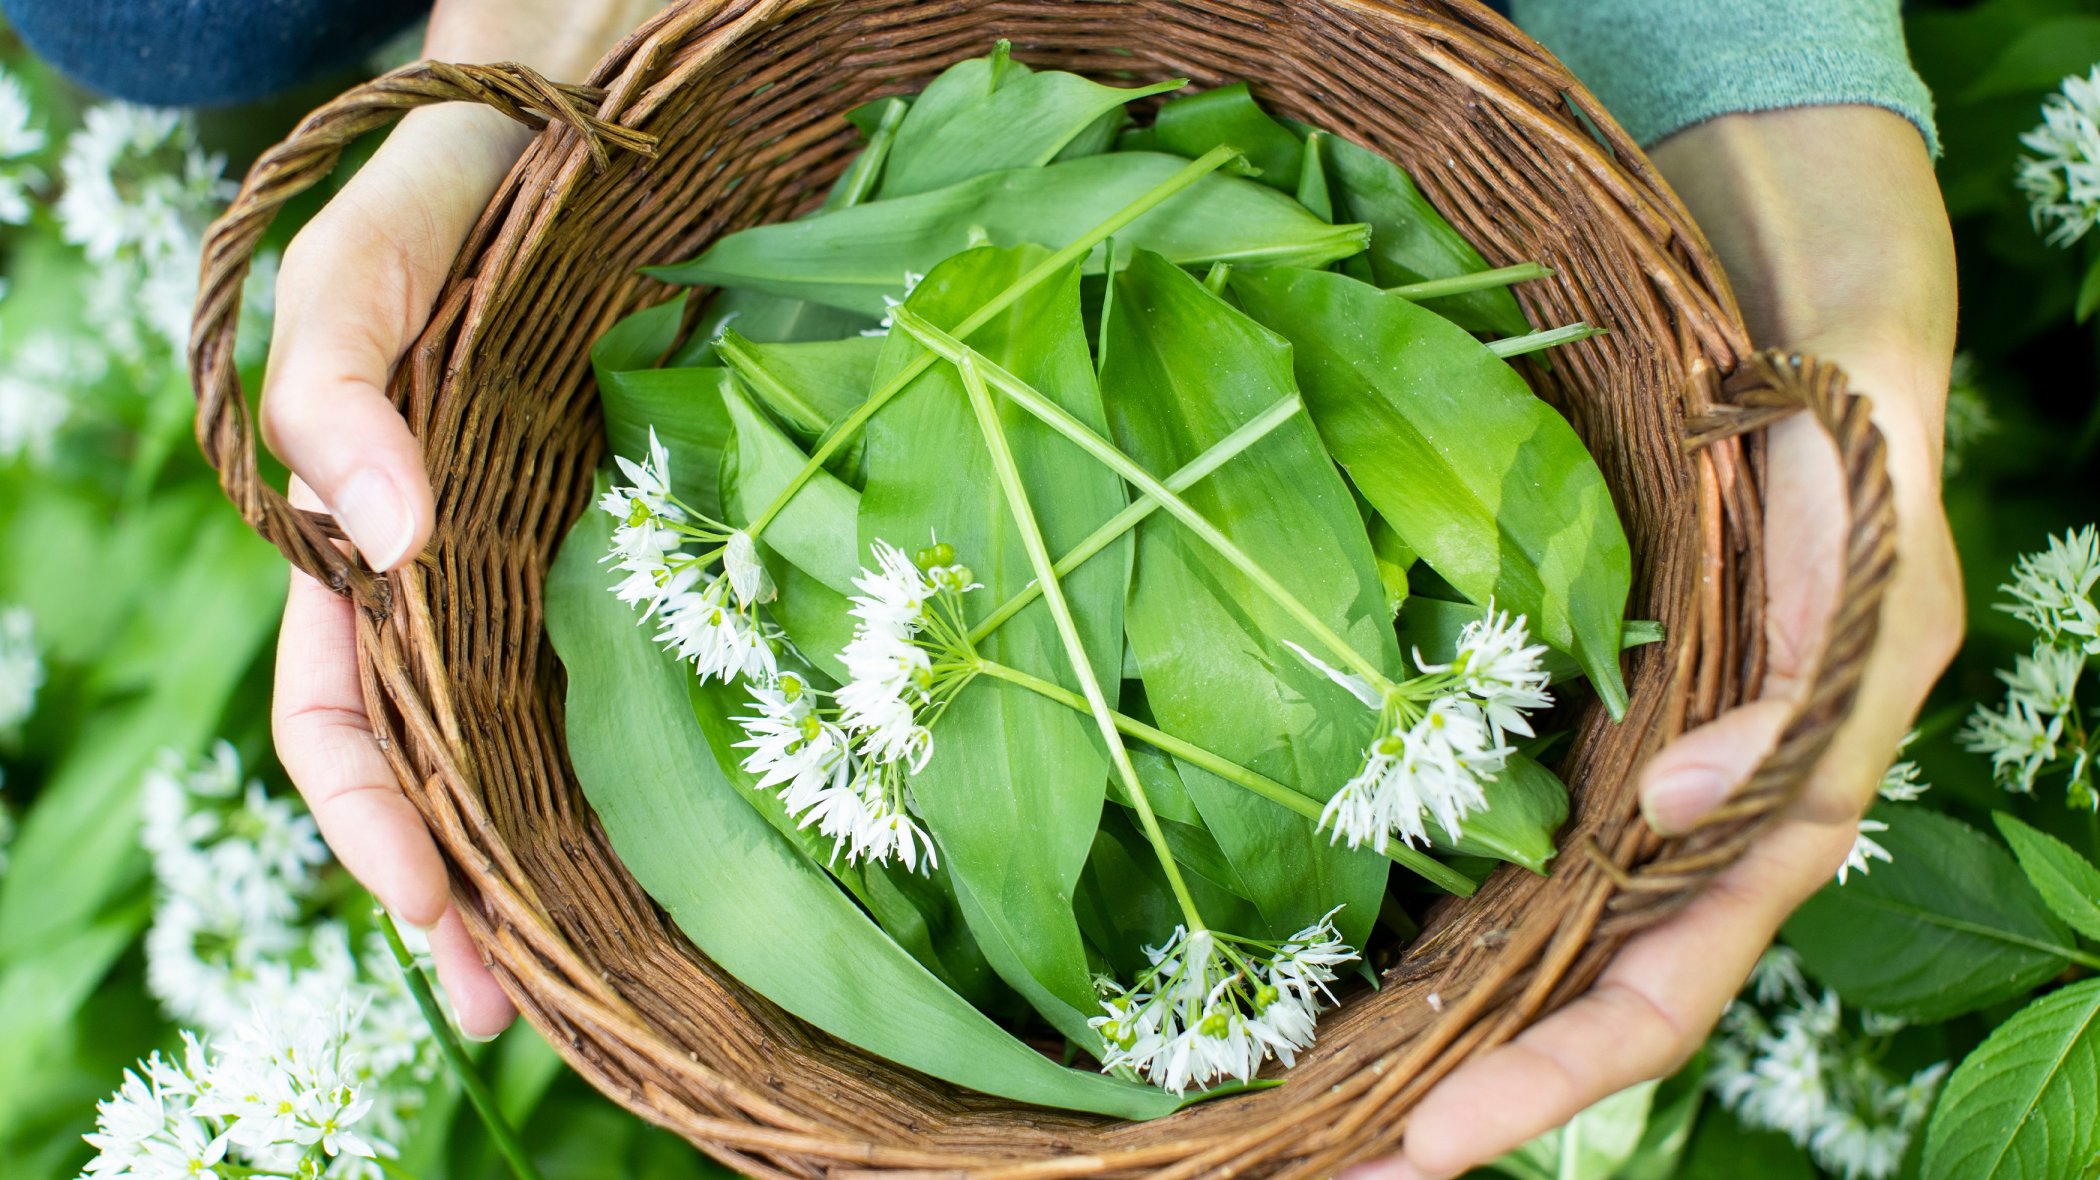 Freshly foraged garlic on a bed of leaves in a wicker basket